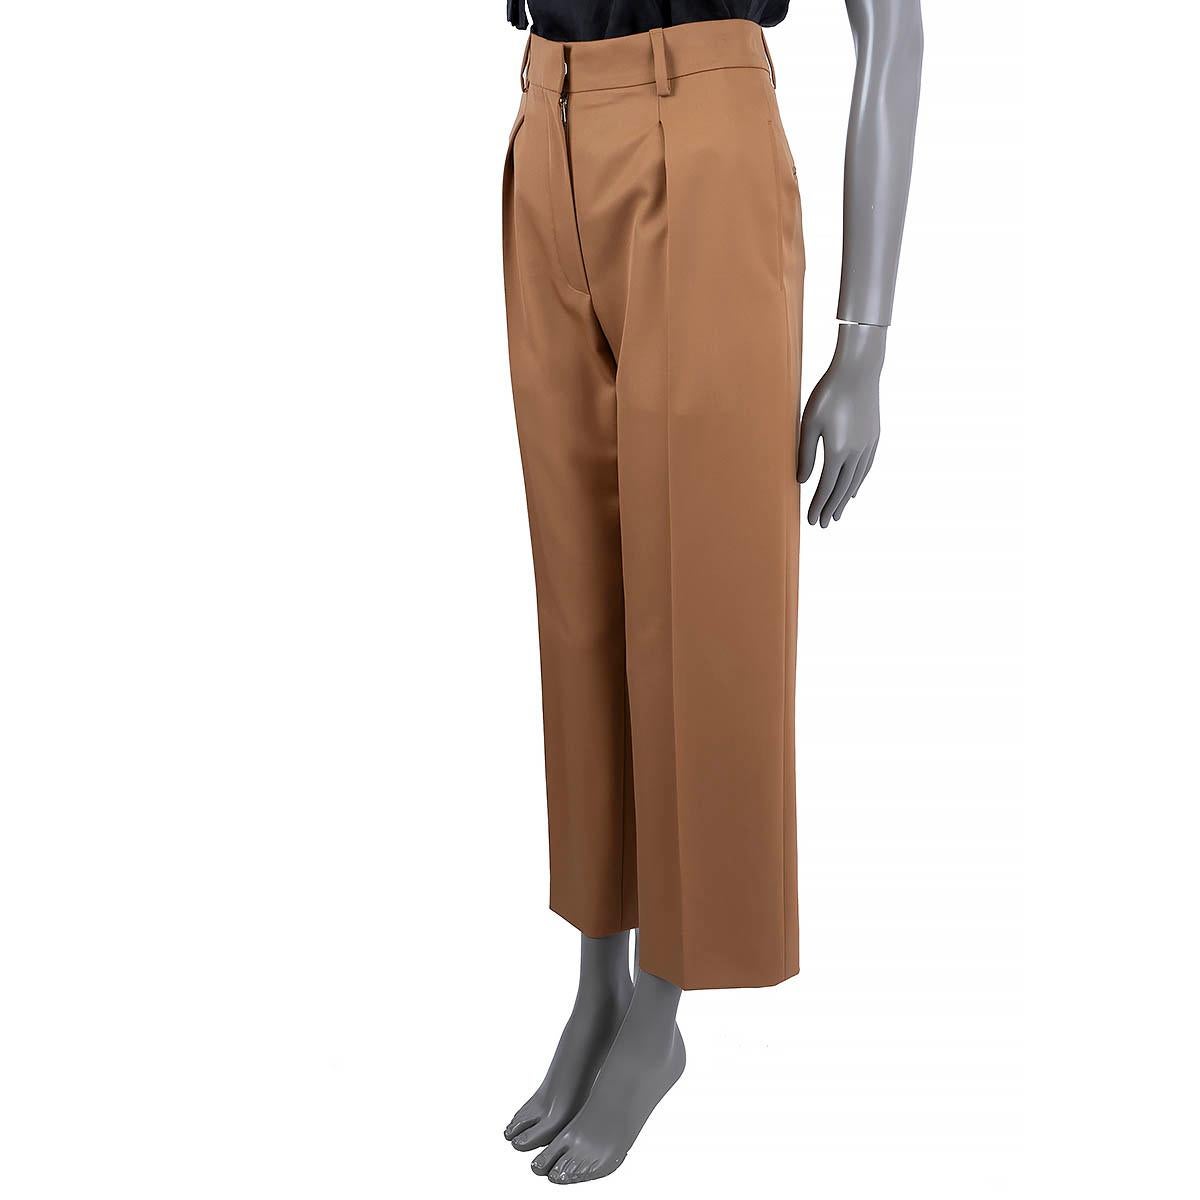 100% authentic Hermès pleated pants in tan wool (100%). Feature a wide-leg, belt loops, slit-pockets in the front and back. Open with a concealed zipper and one hooks, button in the front. Have been worn and are in excellent condition.